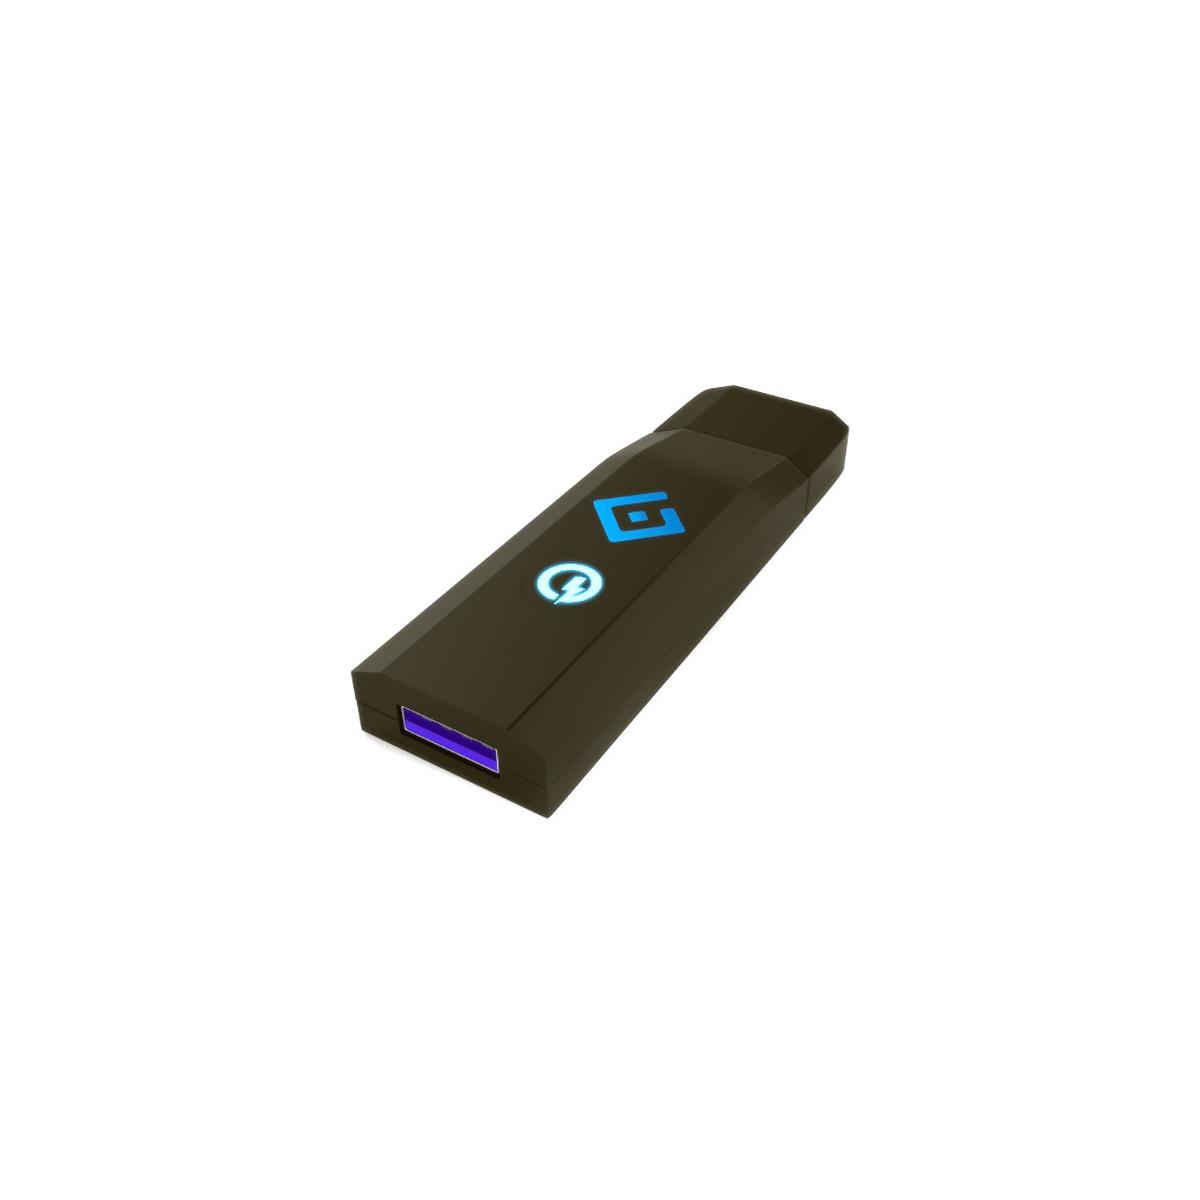 Image of HDfury GoBlue Bluetooth Dongle